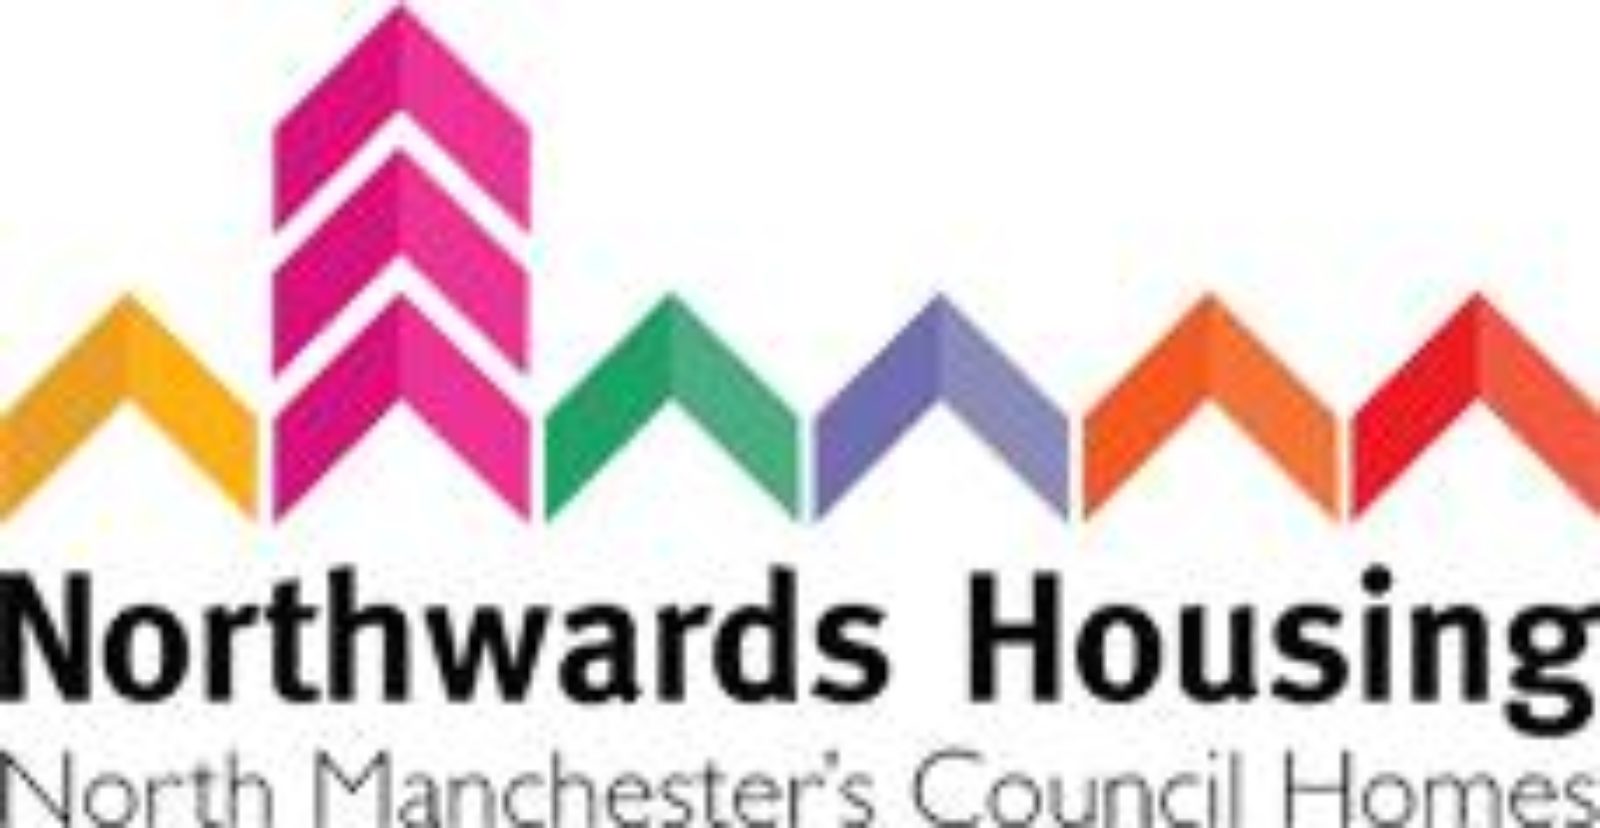 The symbol for the Northwards Housing Organisation